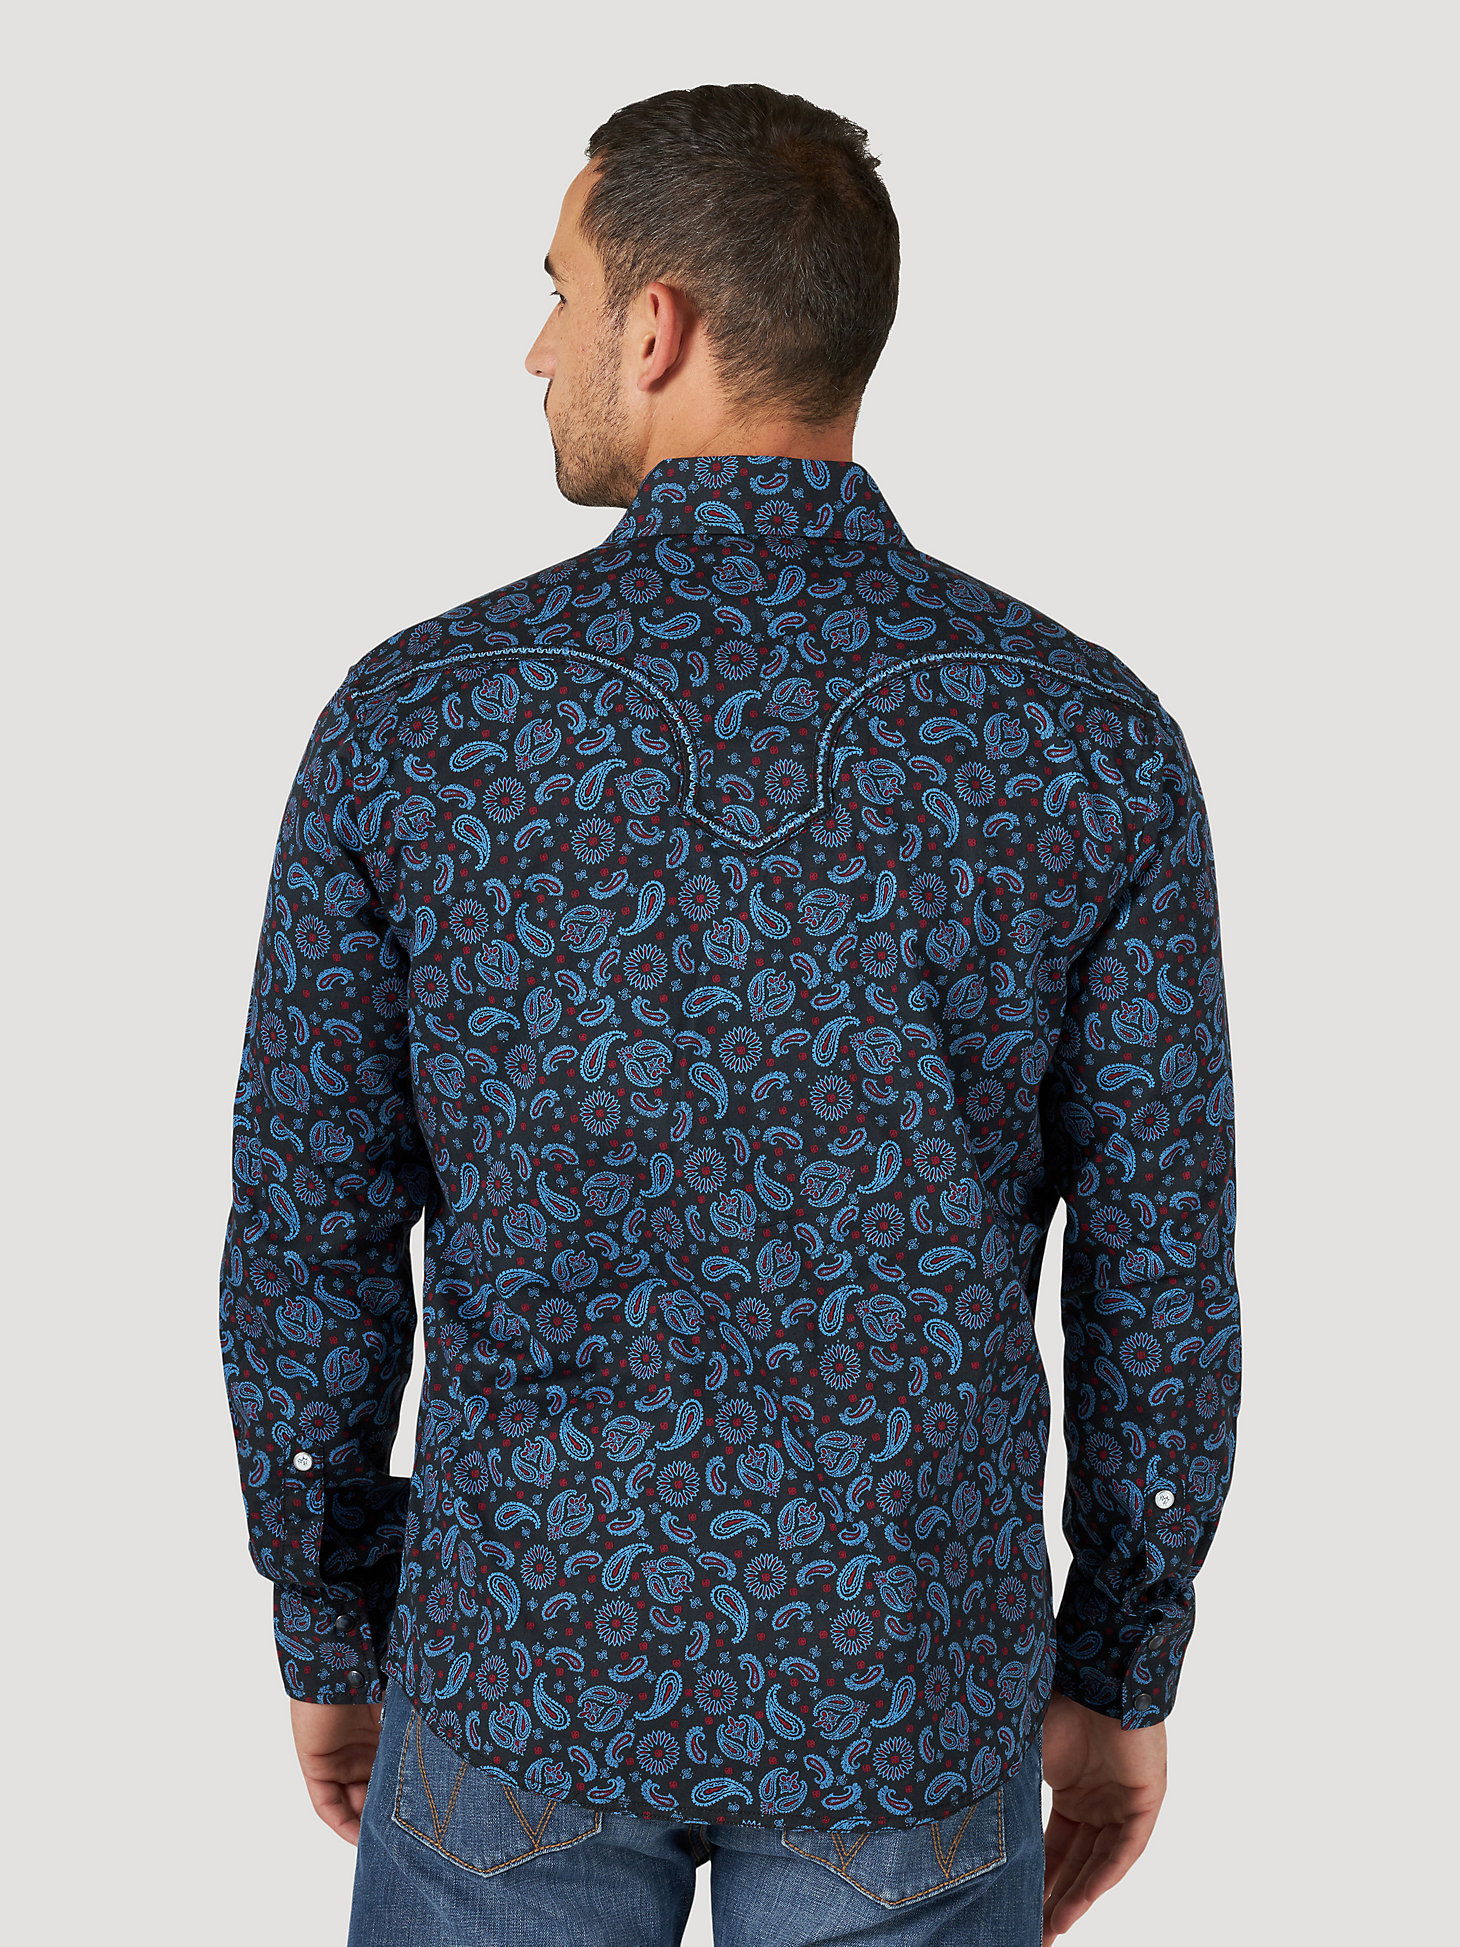 Men's Rock 47® by Wrangler® Long Sleeve Embroidered Yoke Western Snap Print Shirt in Paisley Pop alternative view 1